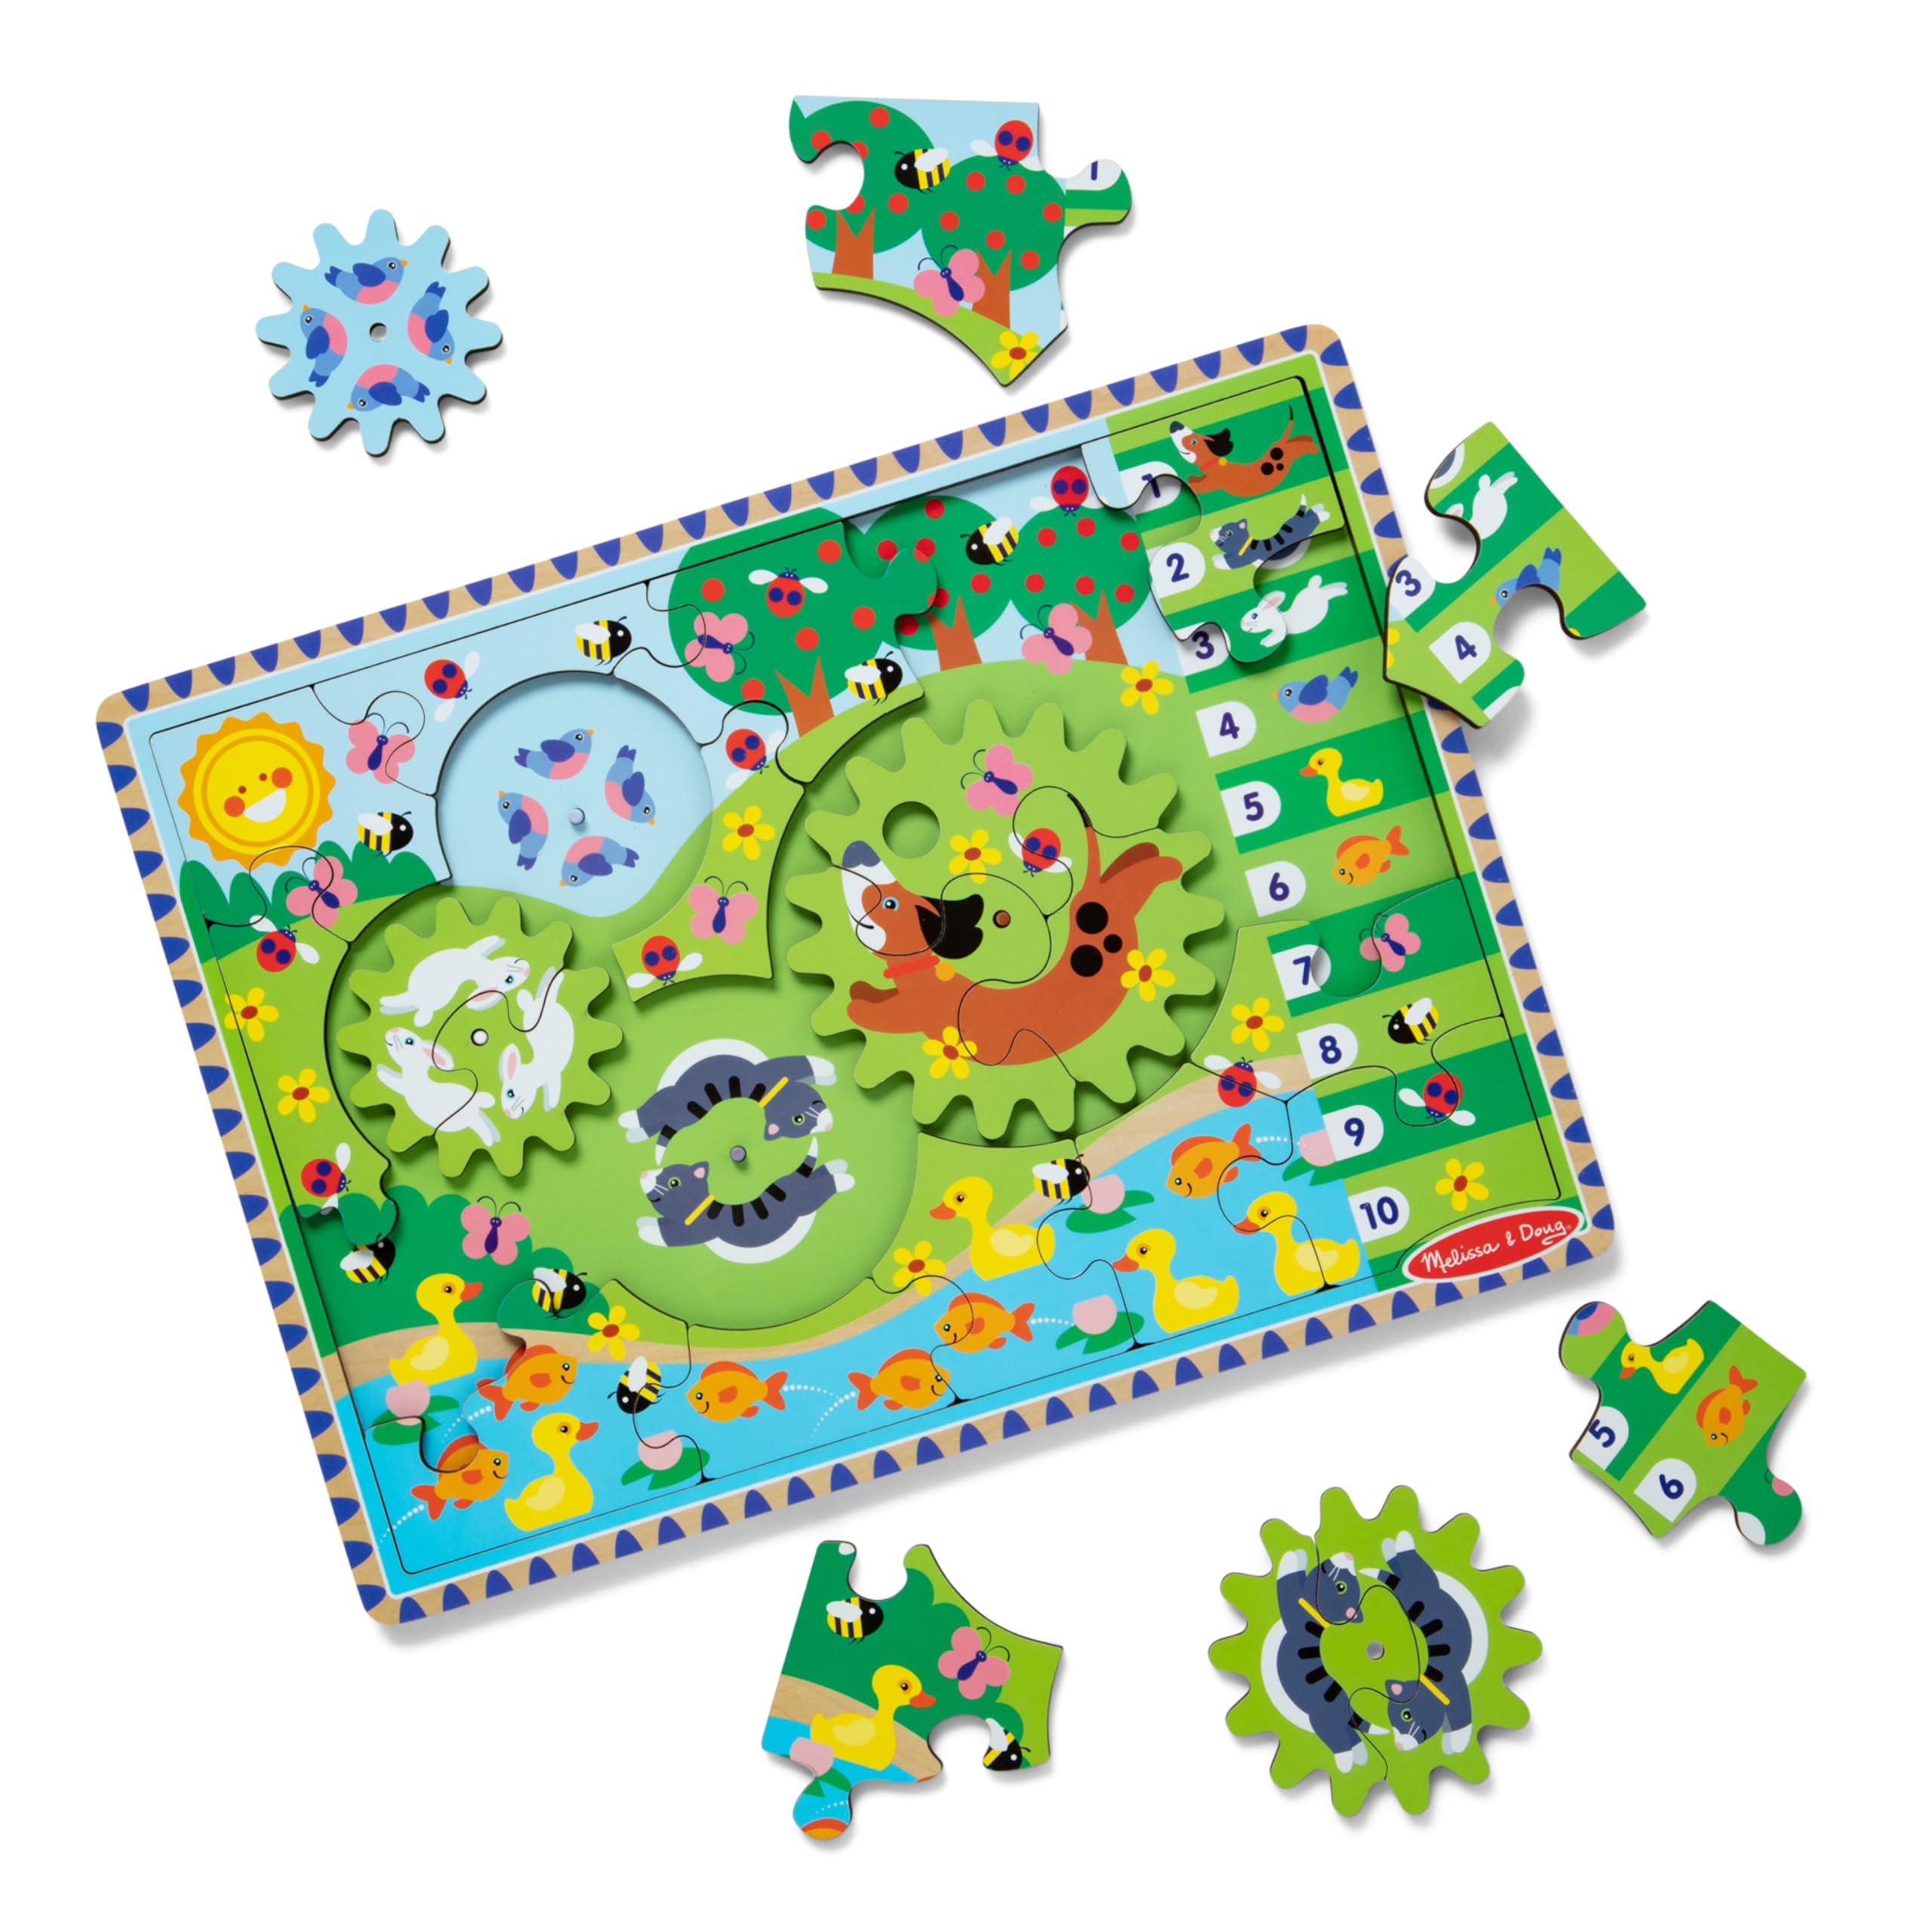 24-Piece Melissa & Doug Wooden Animal Chase Jigsaw Spinning Gear Puzzle $5.90 + Free Shipping w/ Prime or on $35+